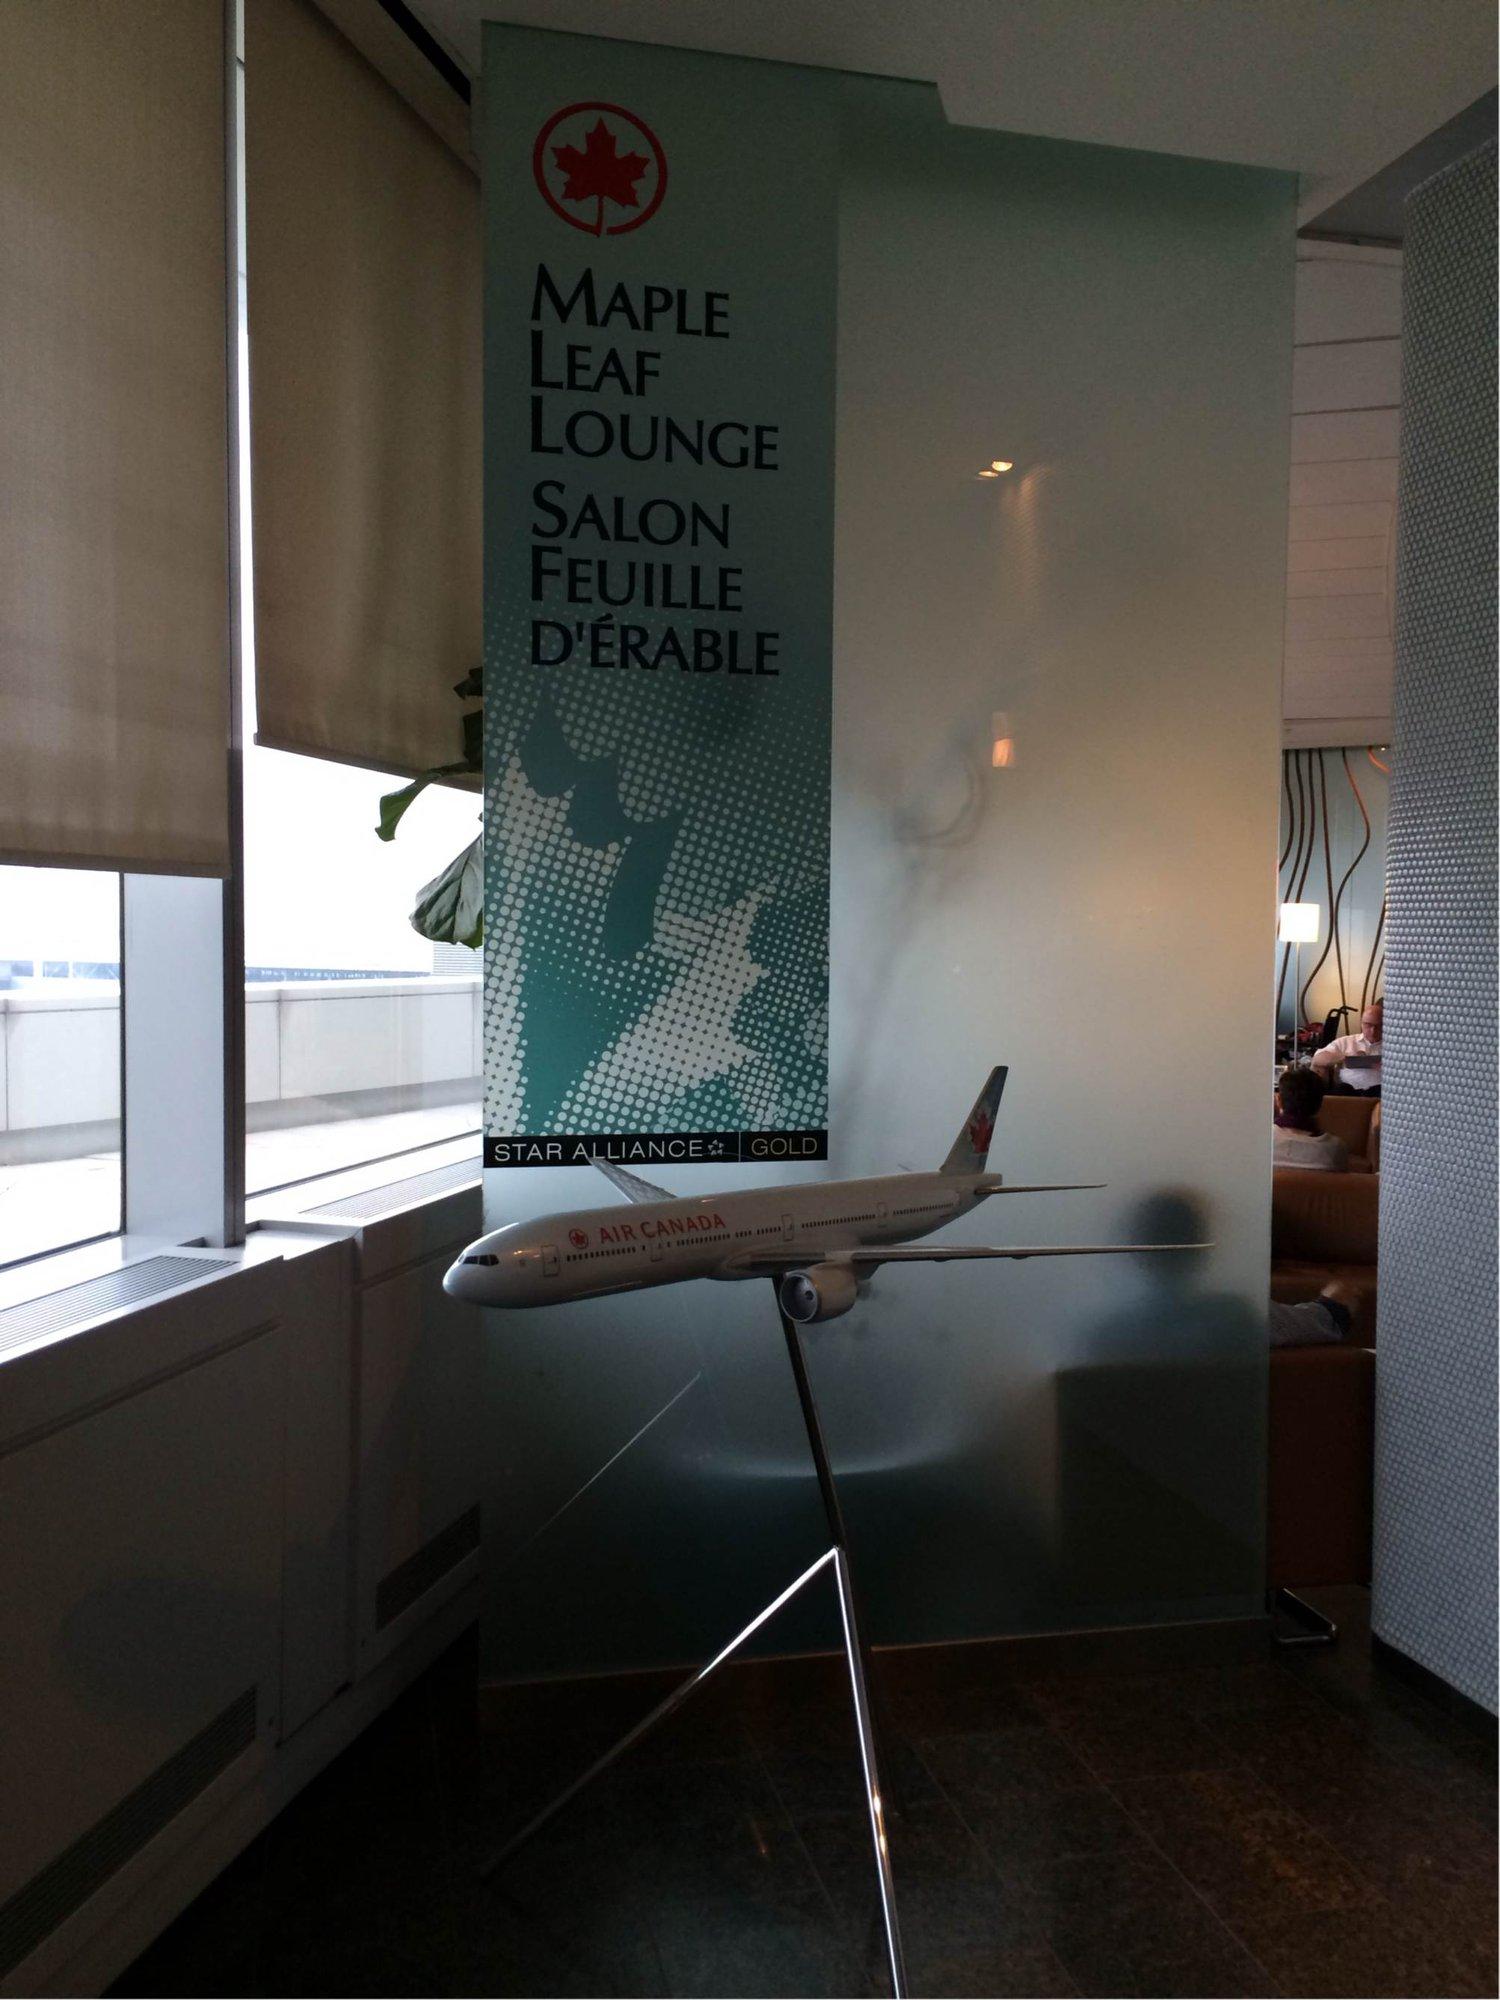 Air Canada Maple Leaf Lounge image 11 of 30